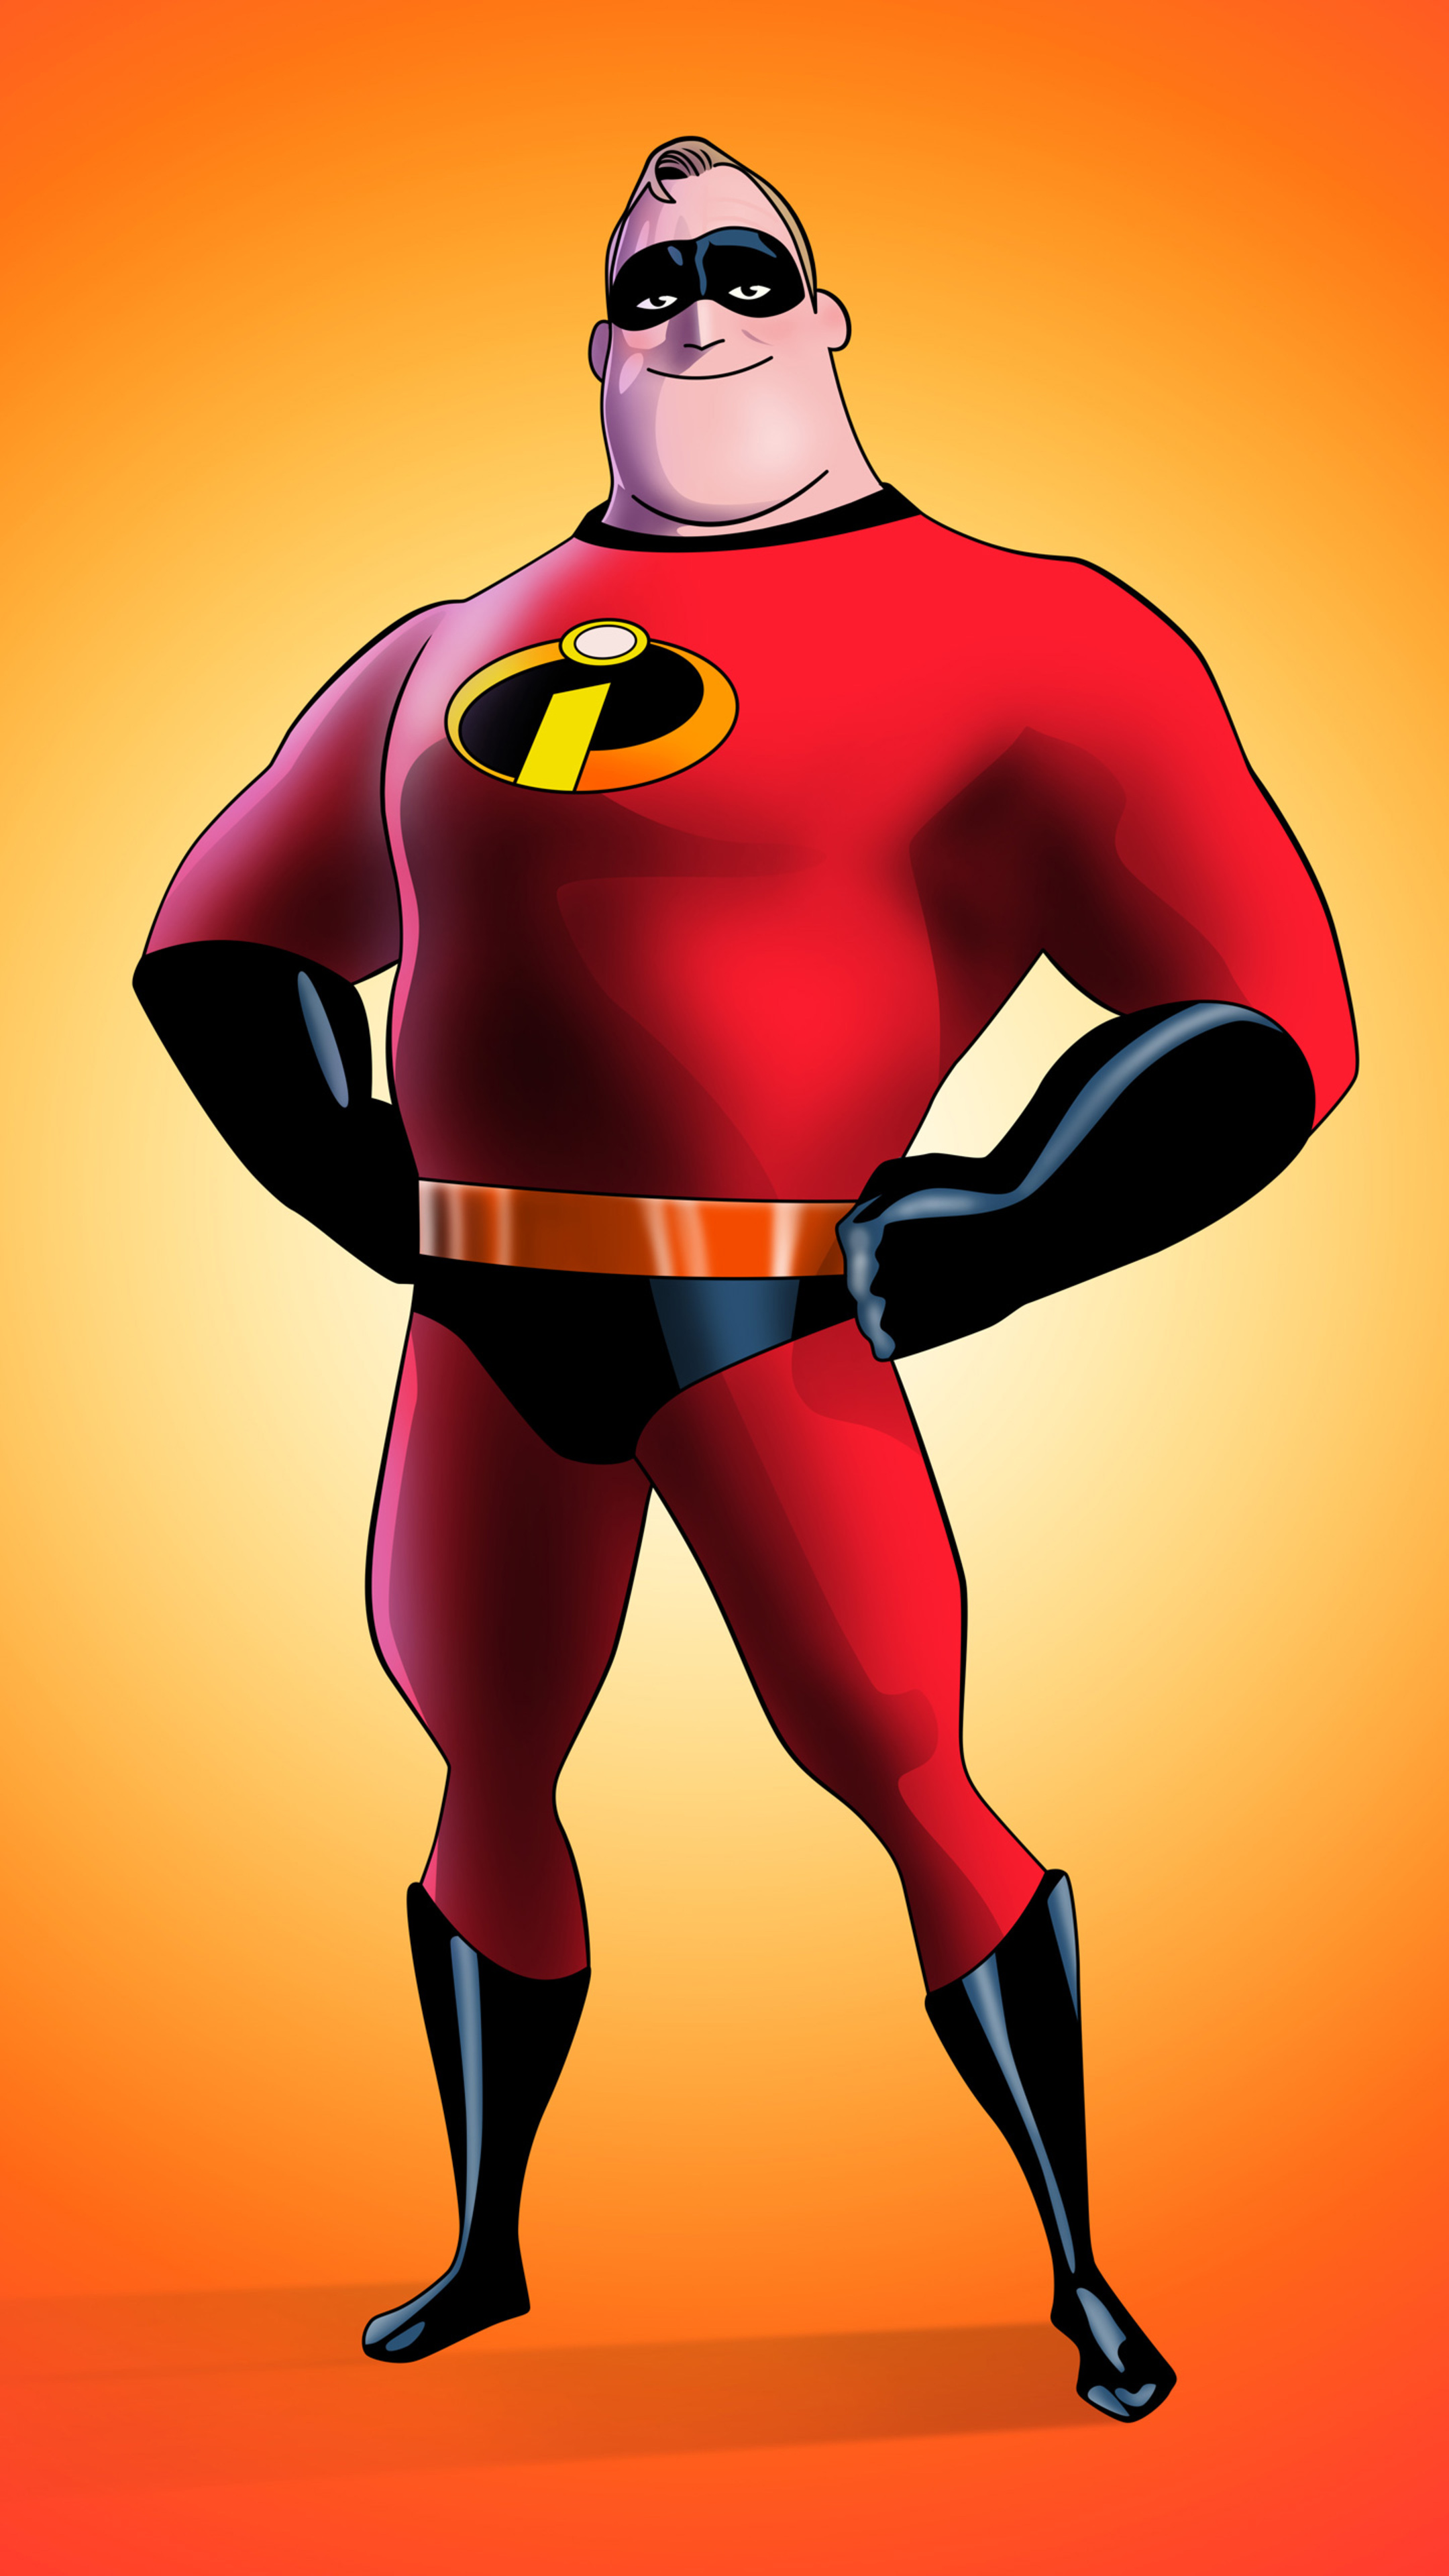 2160x3840 Mr Incredible In The Incredibles 2 2018 Artwork 5k Sony Xperia  X,XZ,Z5 Premium HD 4k Wallpapers, Images, Backgrounds, Photos and Pictures